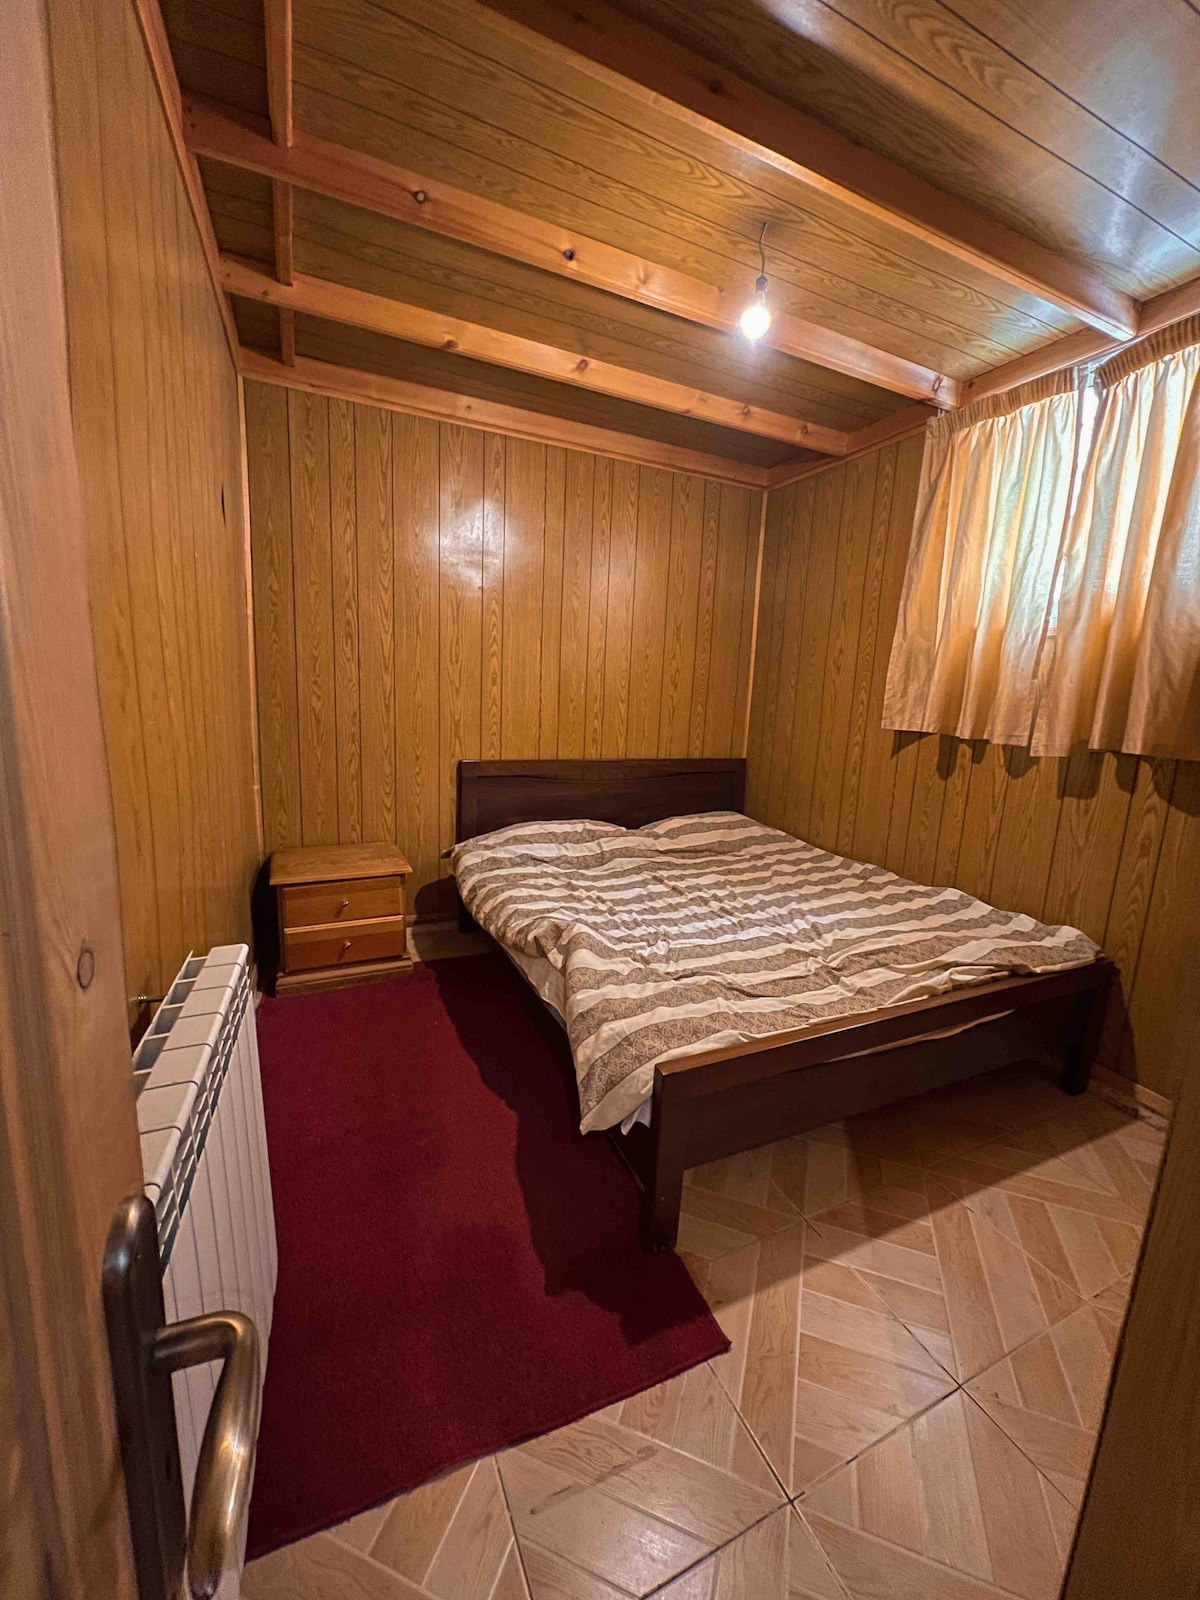 Snowpeak is a cheerful chalet located in arz